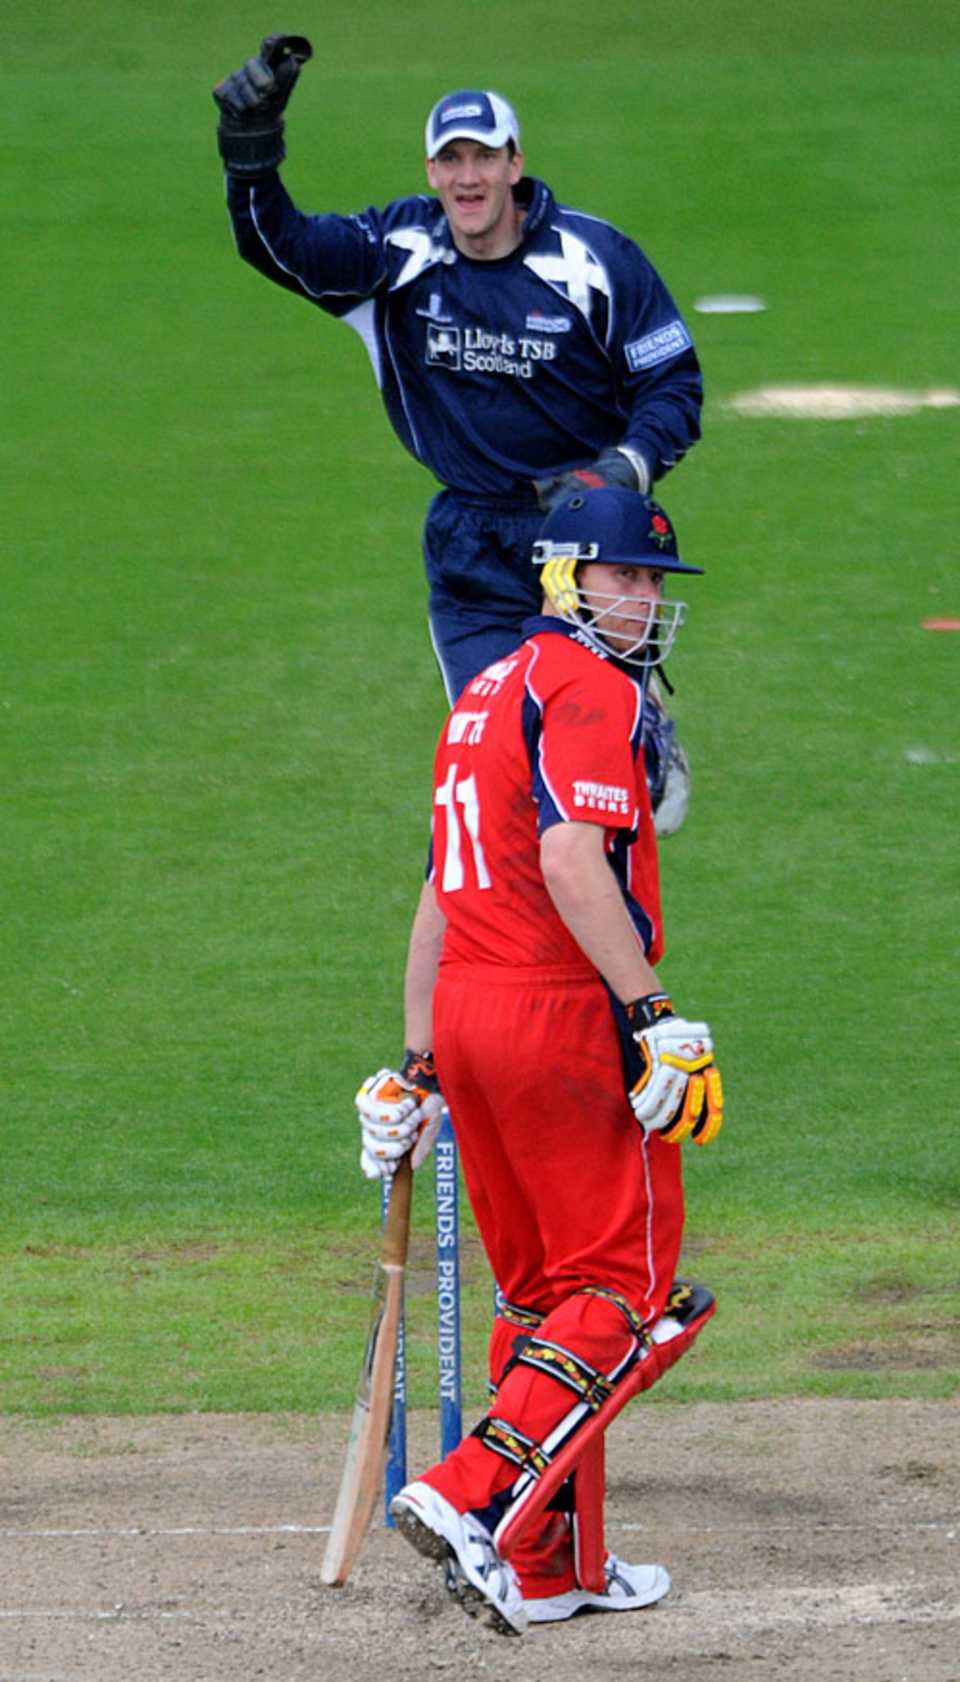 Andrew Flintoff is out LBW to Dewald Nel, Lancashire v Scotland, Friends Provident Trophy, Old Trafford, May 5, 2008